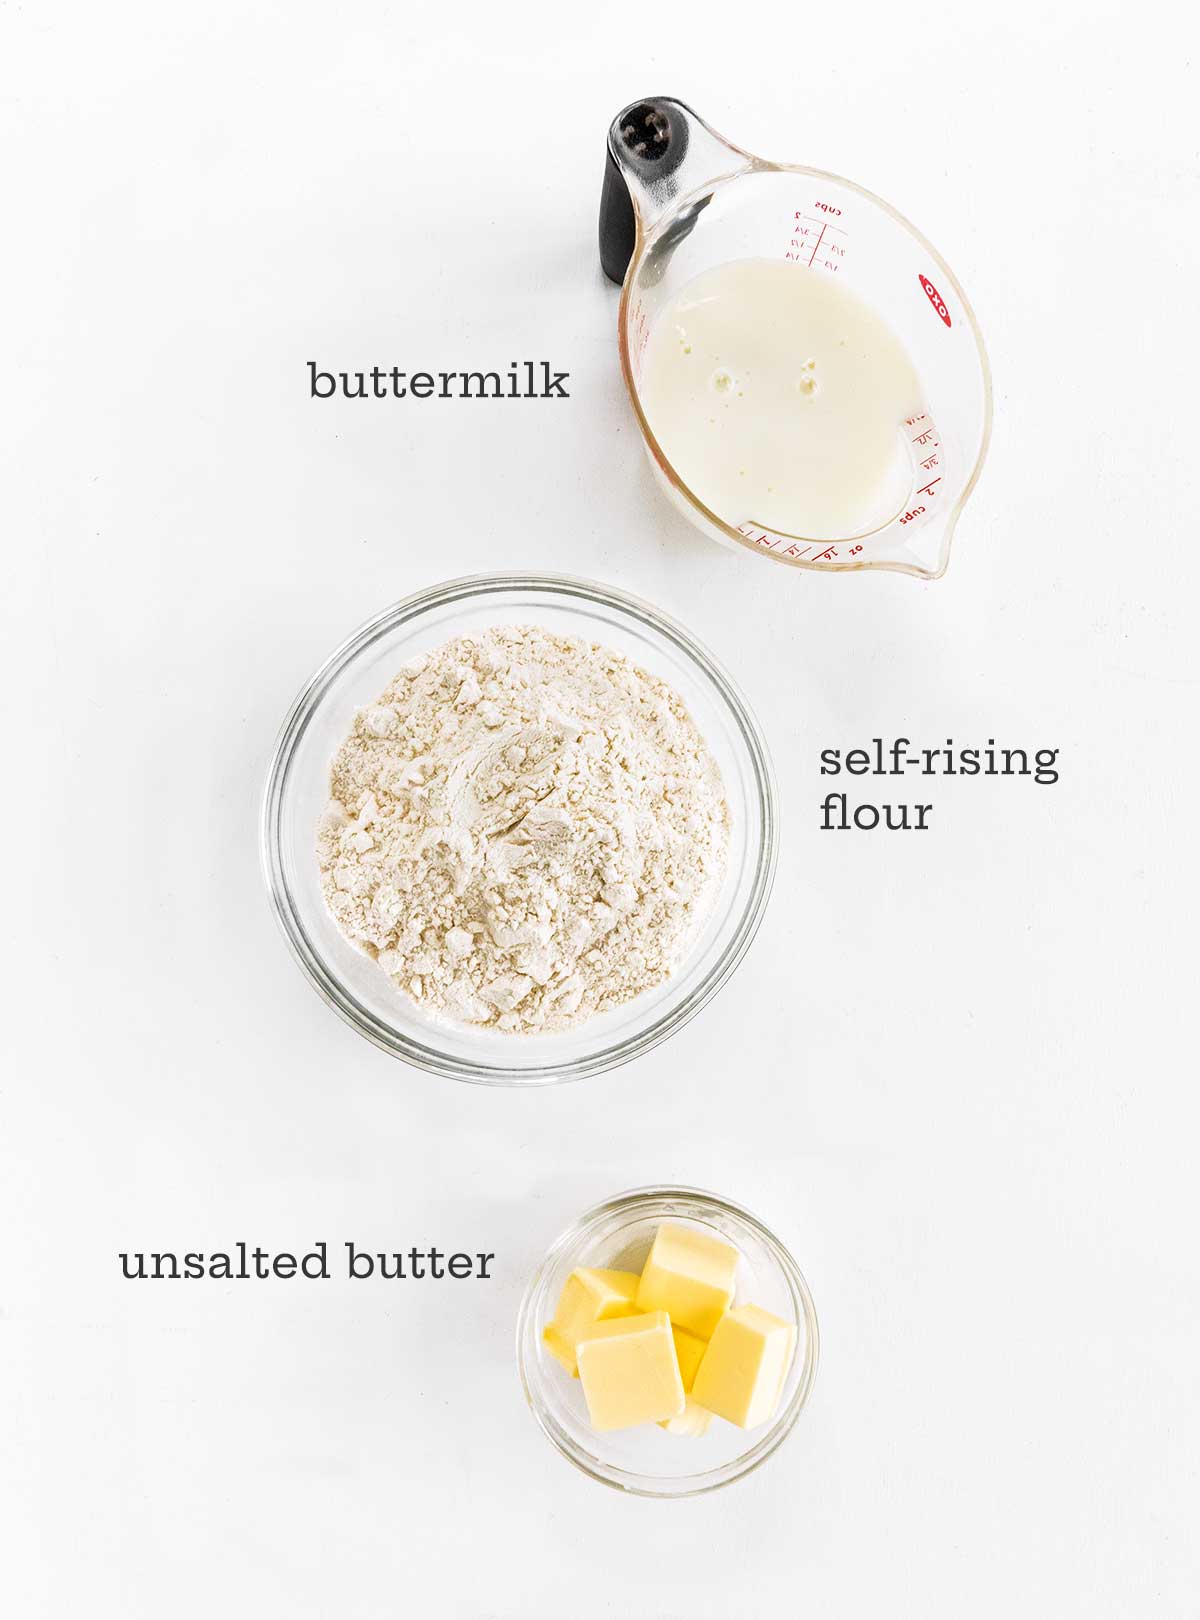 Ingredients for Southern buttermilk biscuits -- buttermilk, flour, and butter.